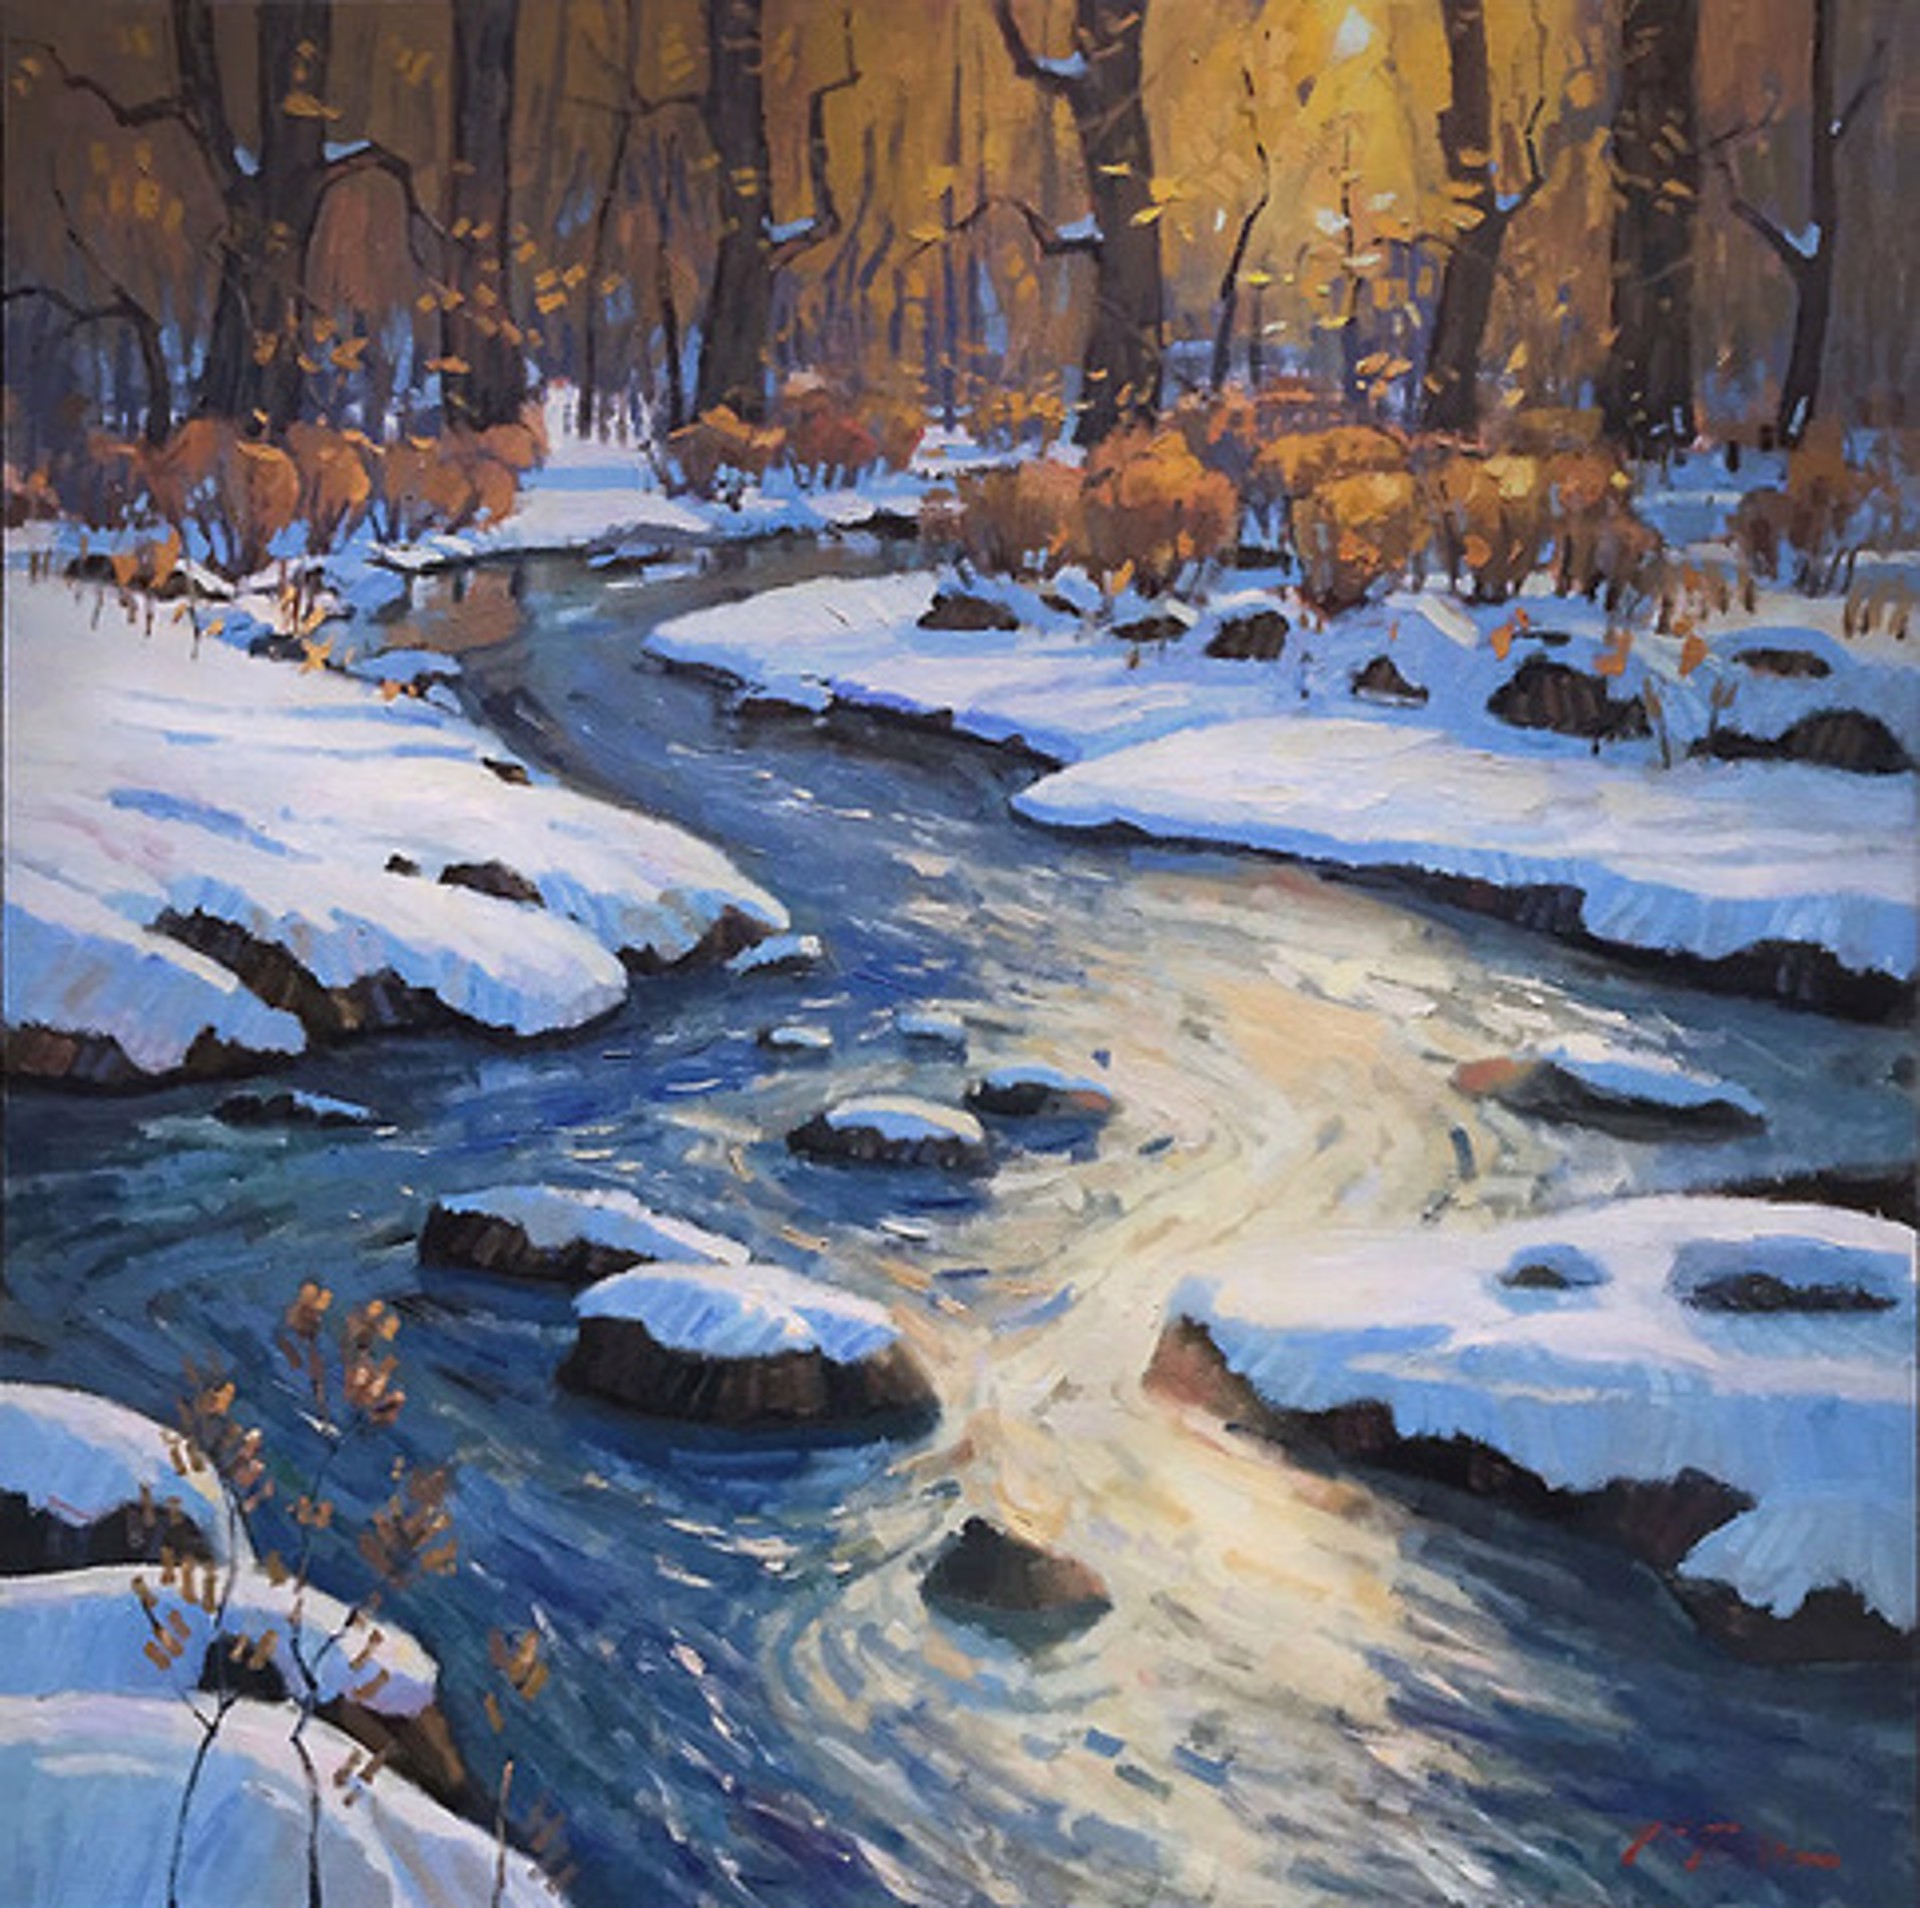 St. Vrain Creek at Sunset by Perry Brown